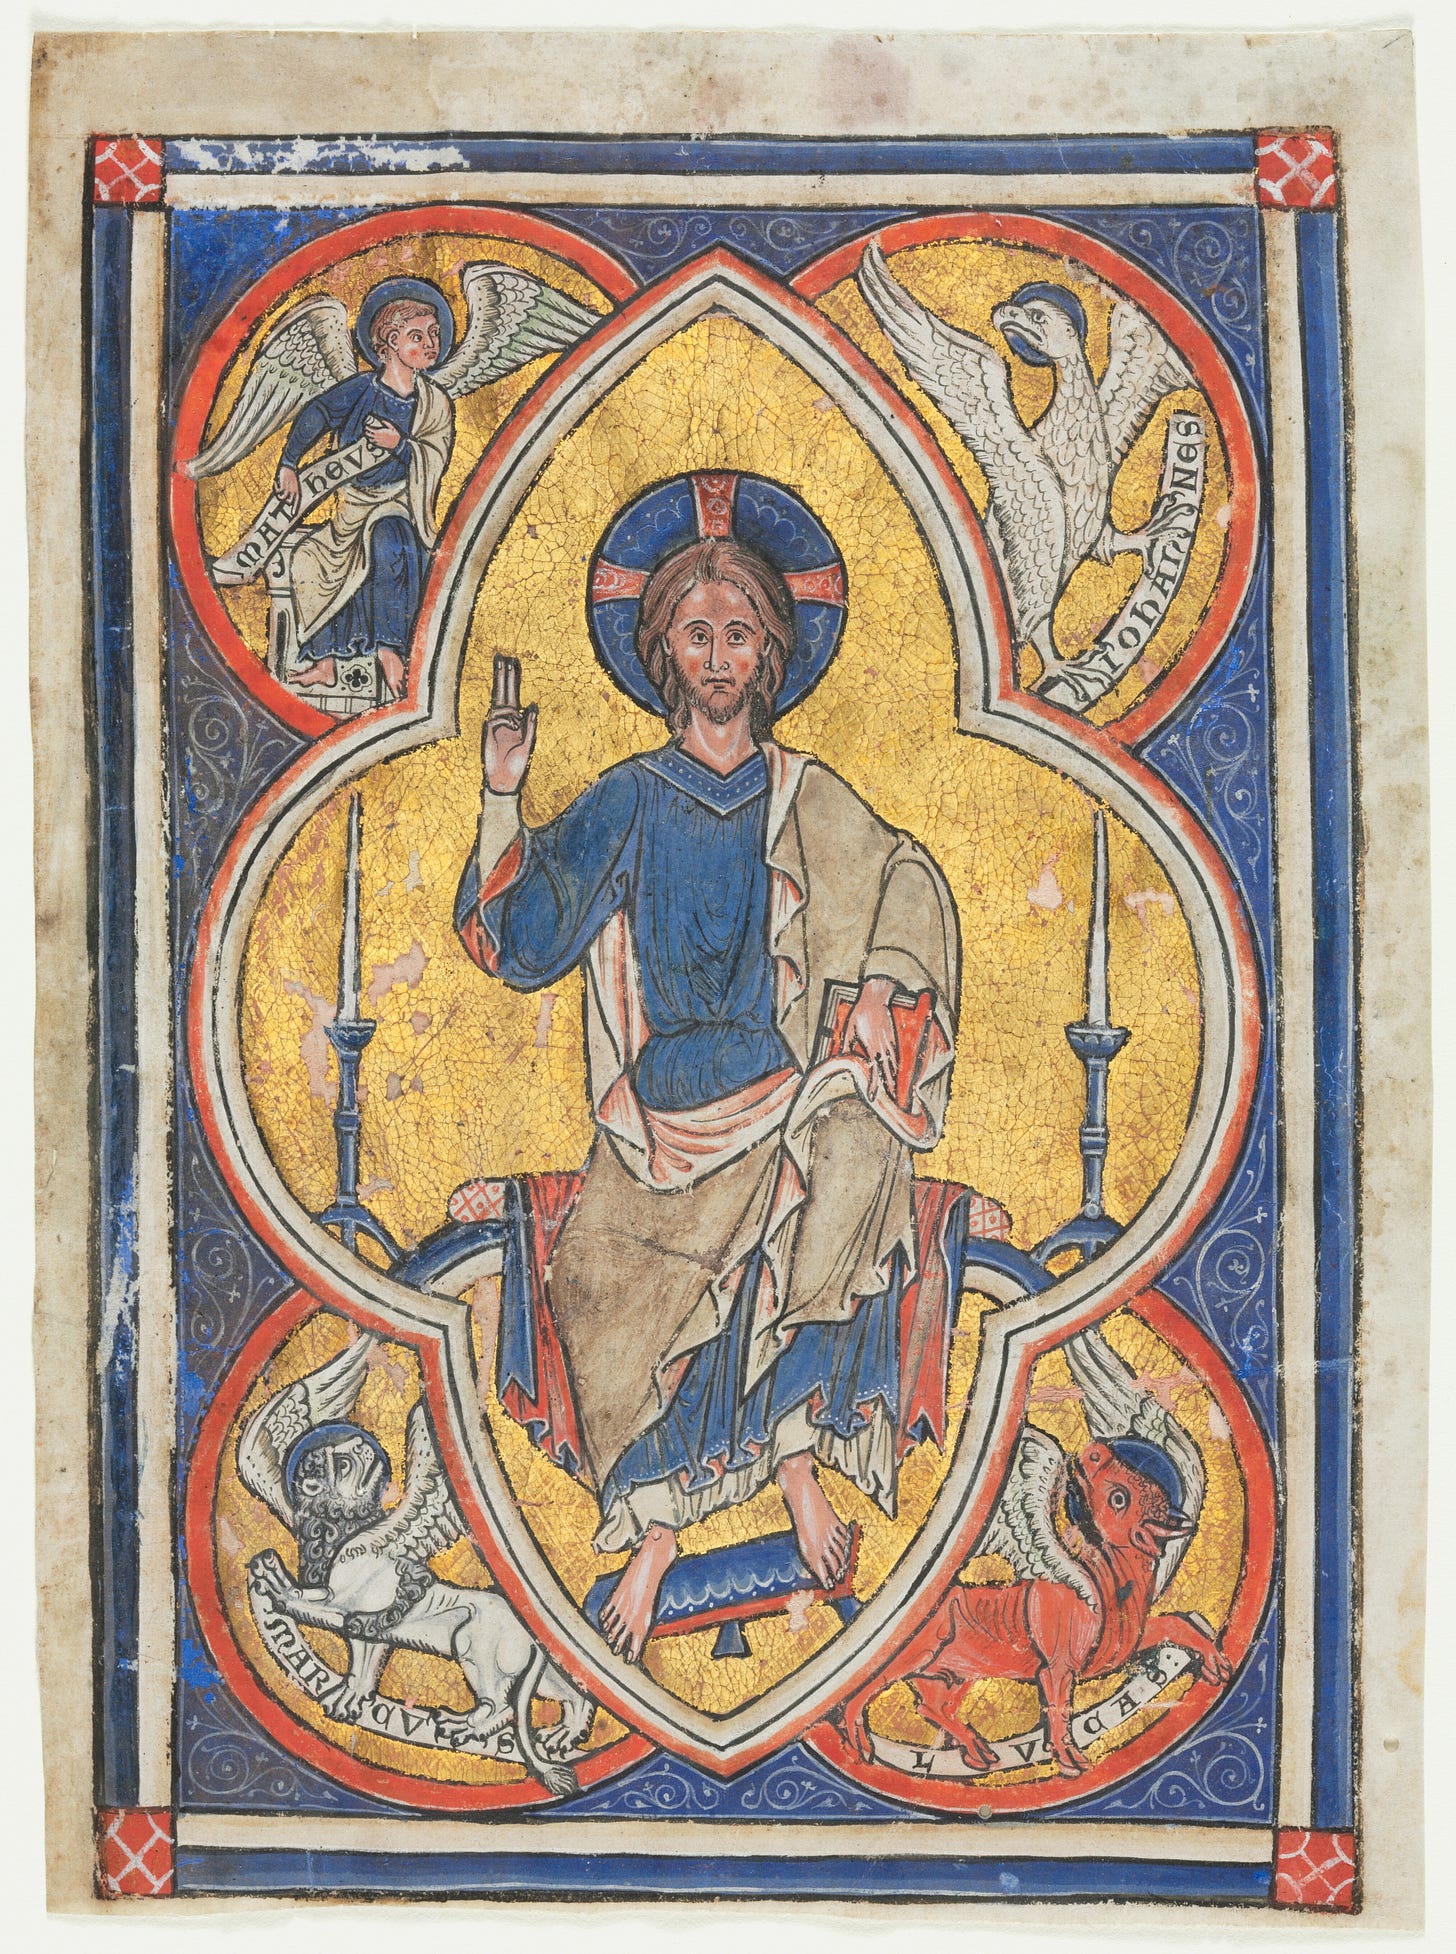 Miniature Excised from a Psalter: Christ in Majesty with Symbols of the  Four Evangelists | Cleveland Museum of Art